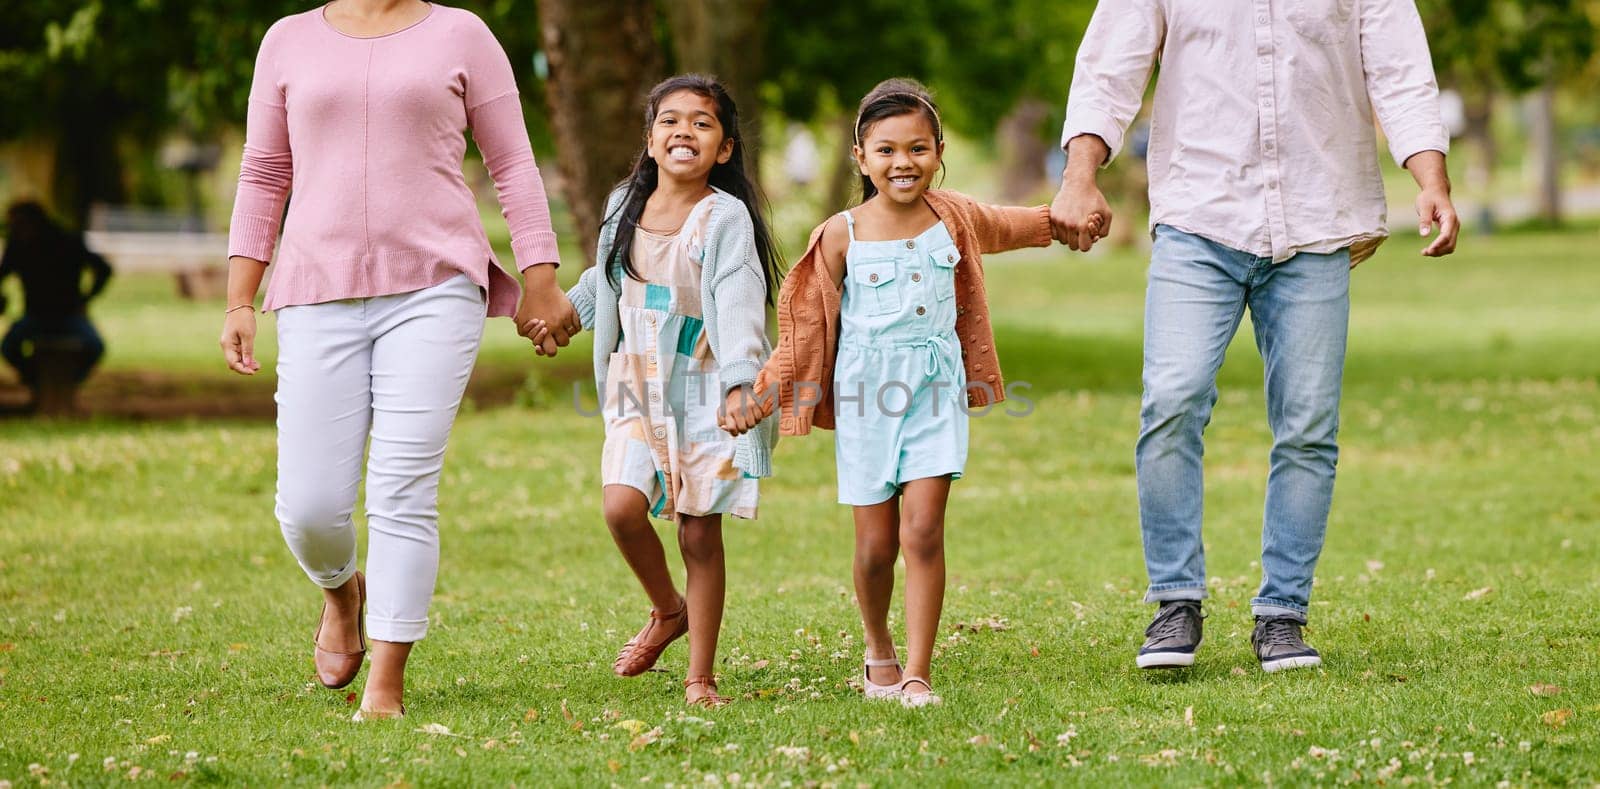 Family, park and children holding hands with parents walking, bonding and time in nature together with smile. Mother, father and kids walk on grass field for fun outdoor adventure in garden or woods.